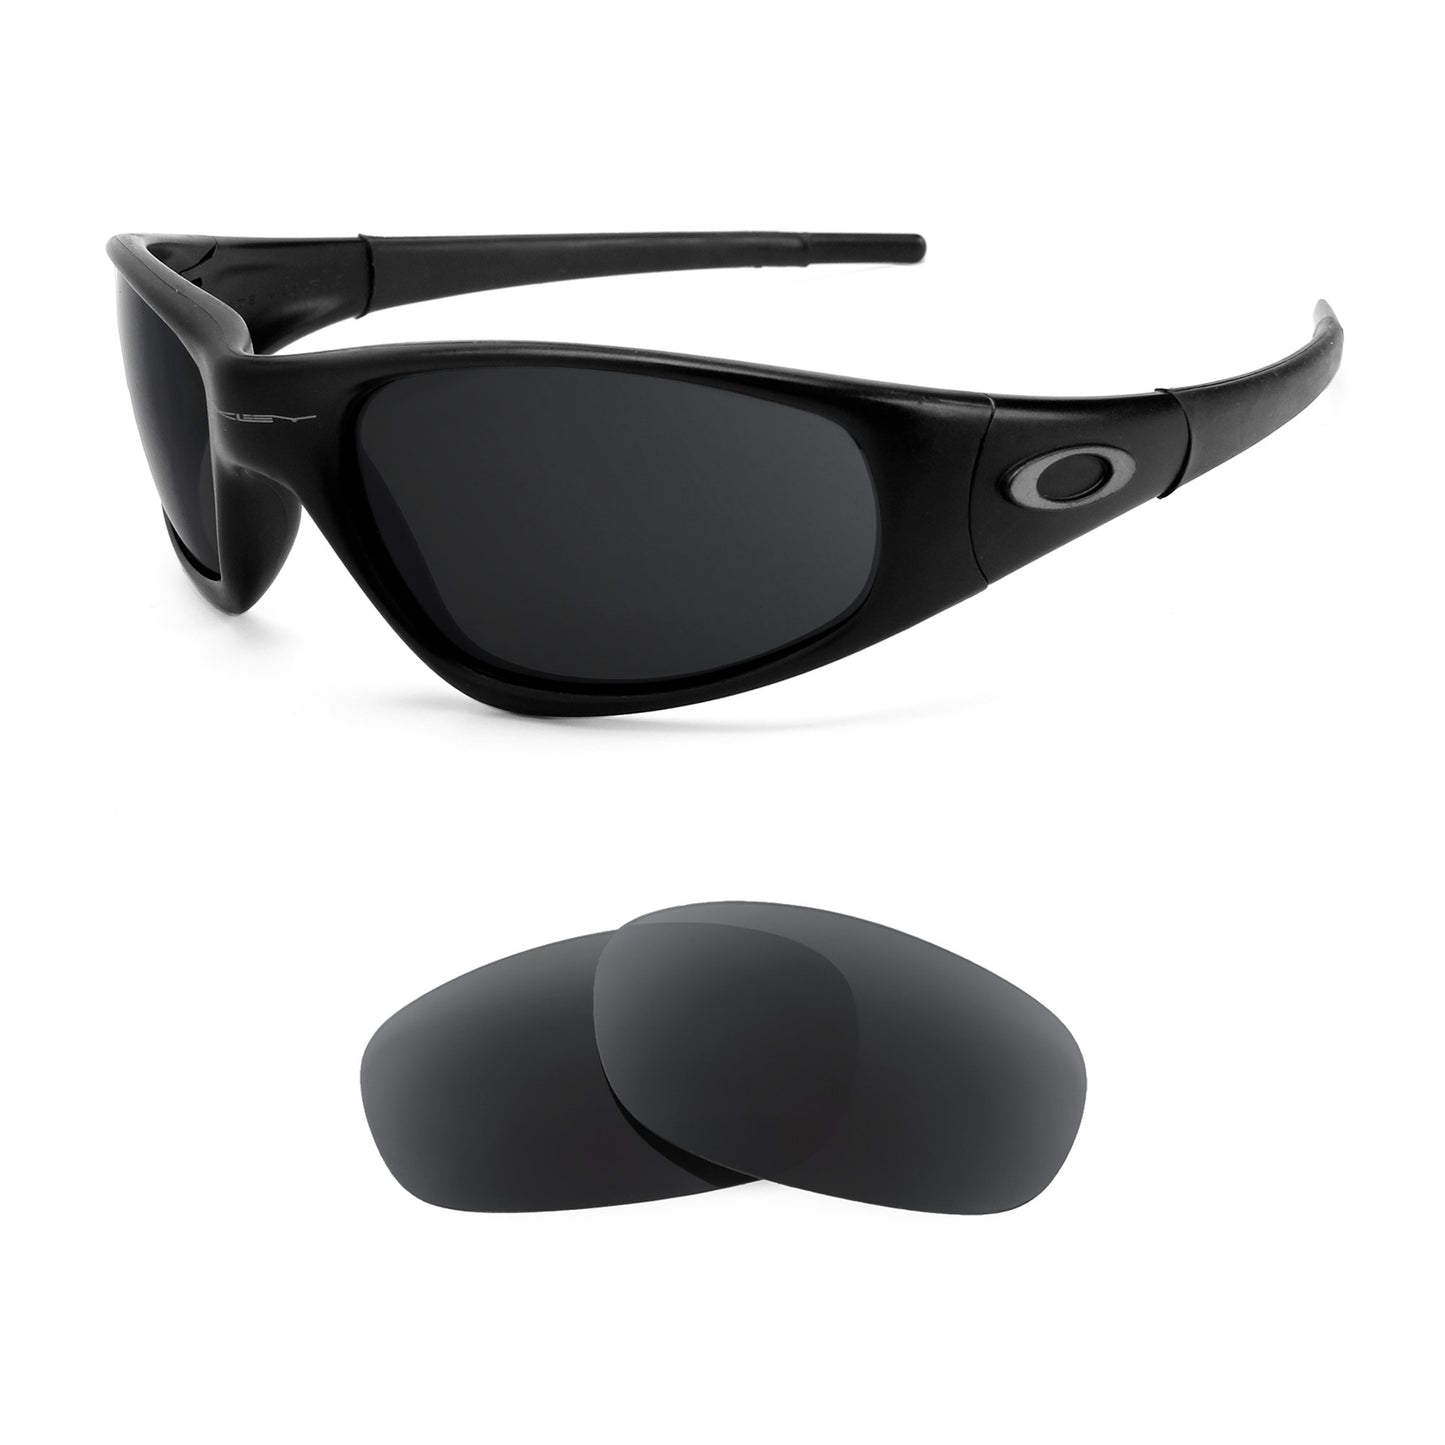 Oakley Straight Jacket (1996) sunglasses with replacement lenses